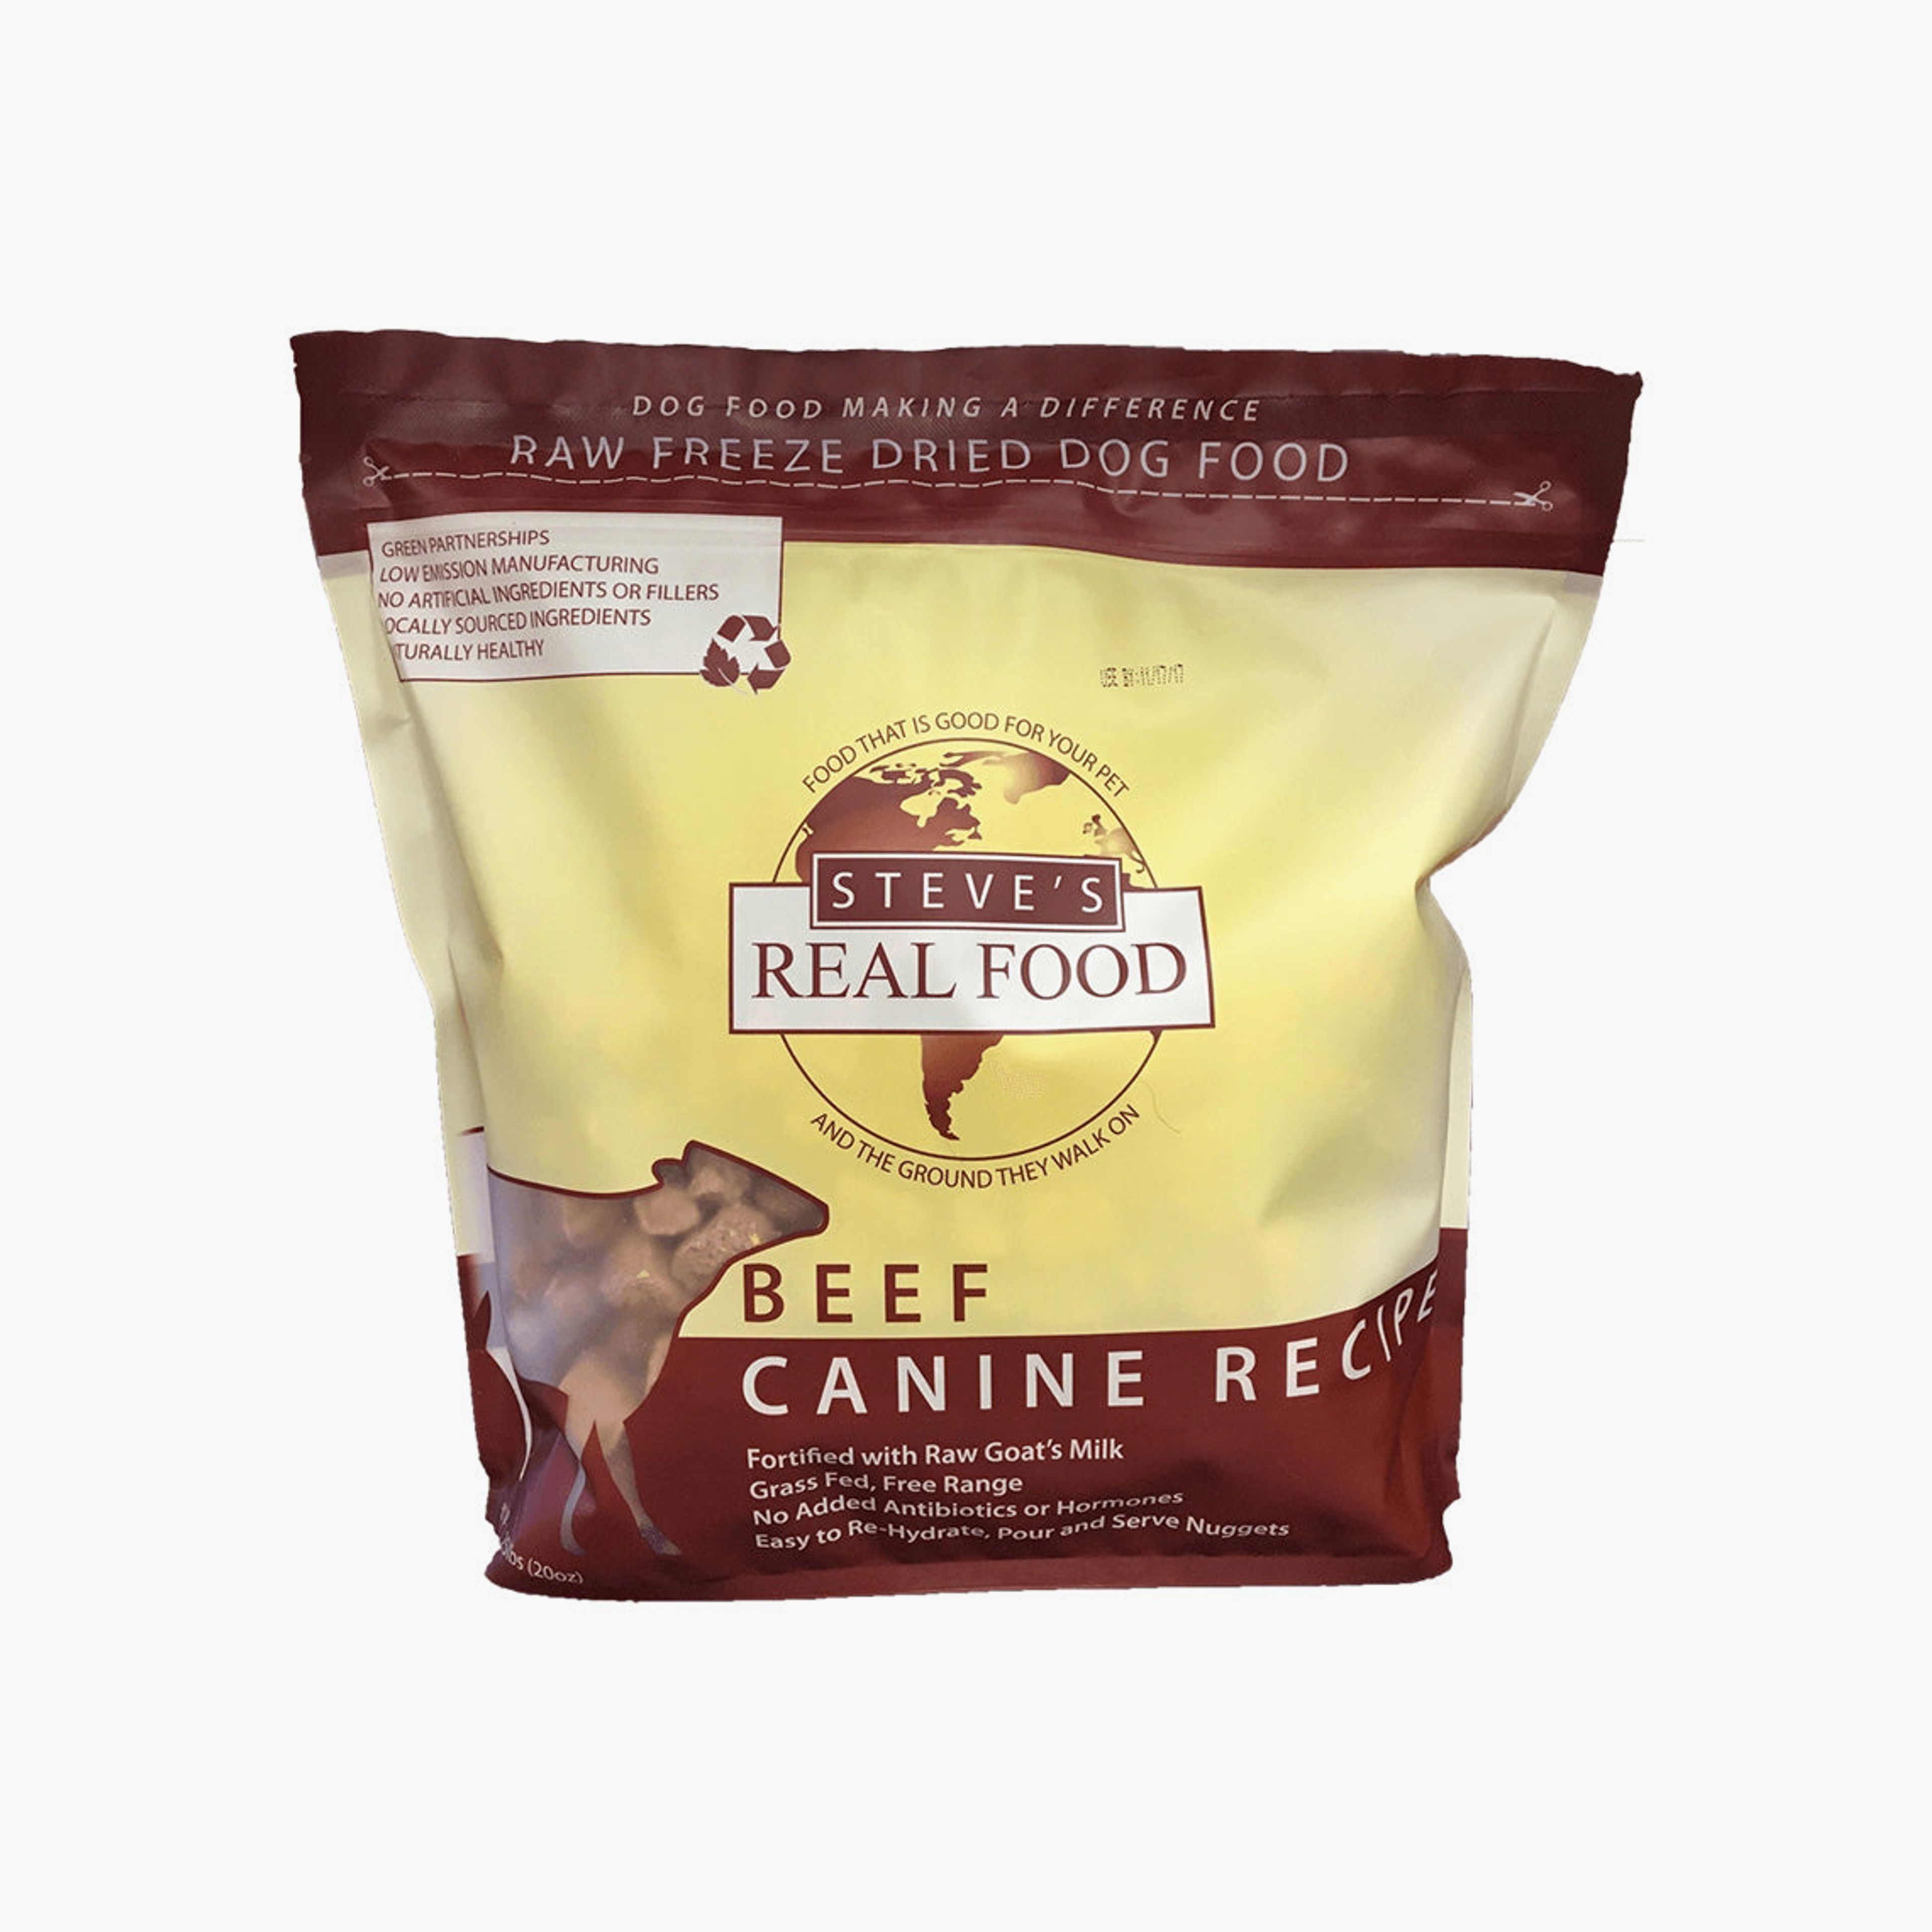 Steve's Real Food Freeze Dried Nuggets for Dogs and Cats